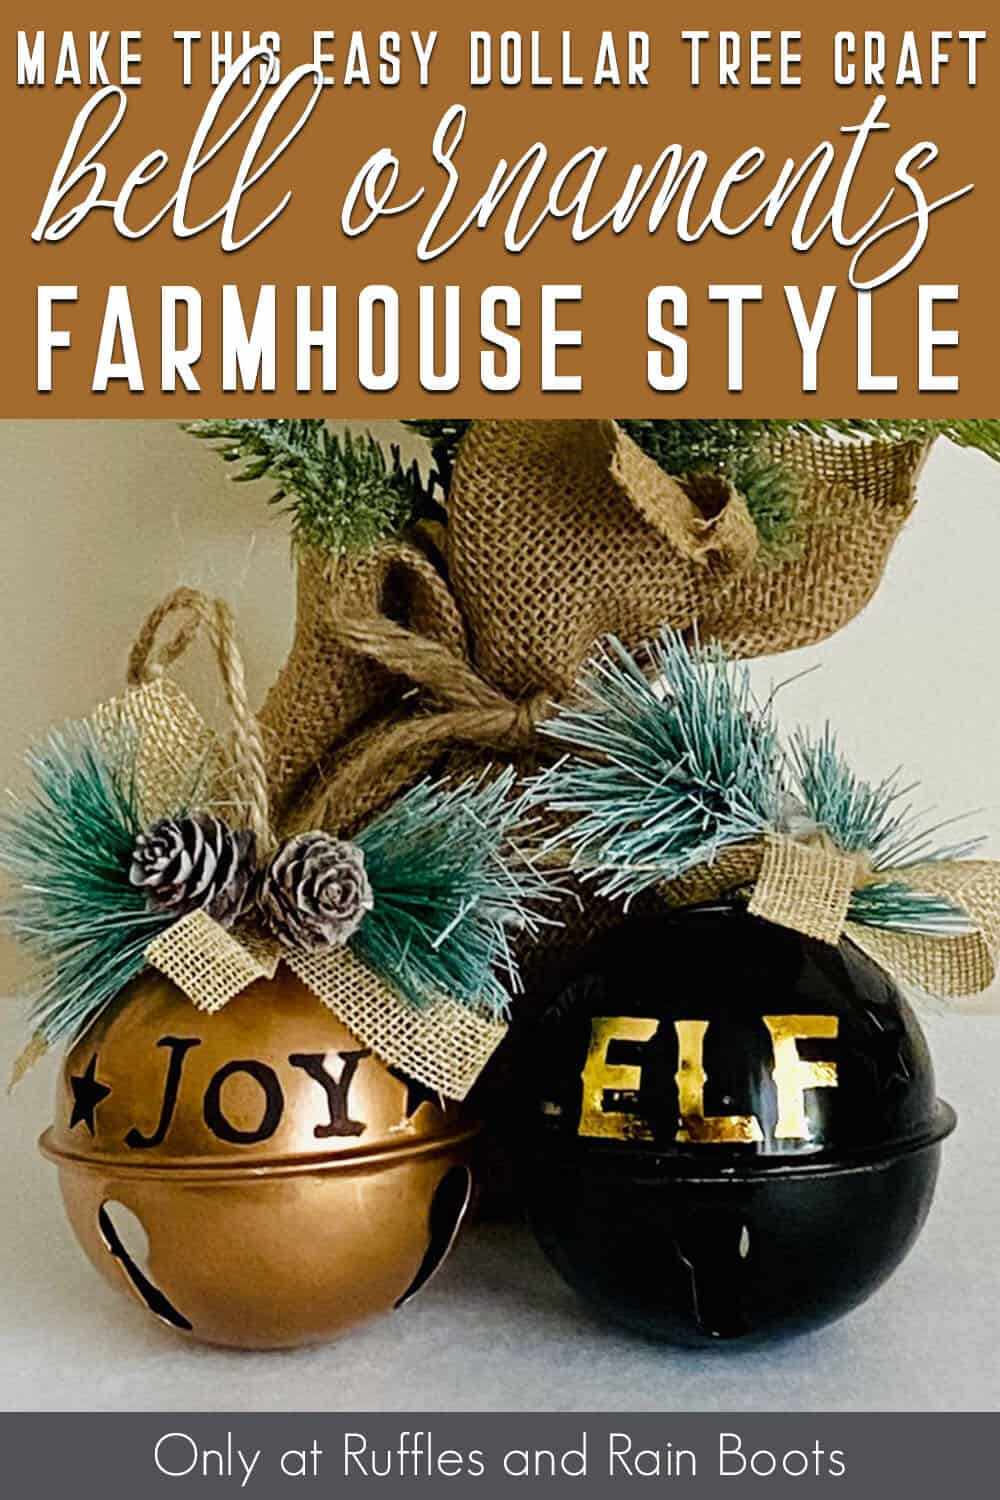 dollar tree craft bell ornaments with text which reads make this easy dollar tree craft bell ornaments farmhouse style